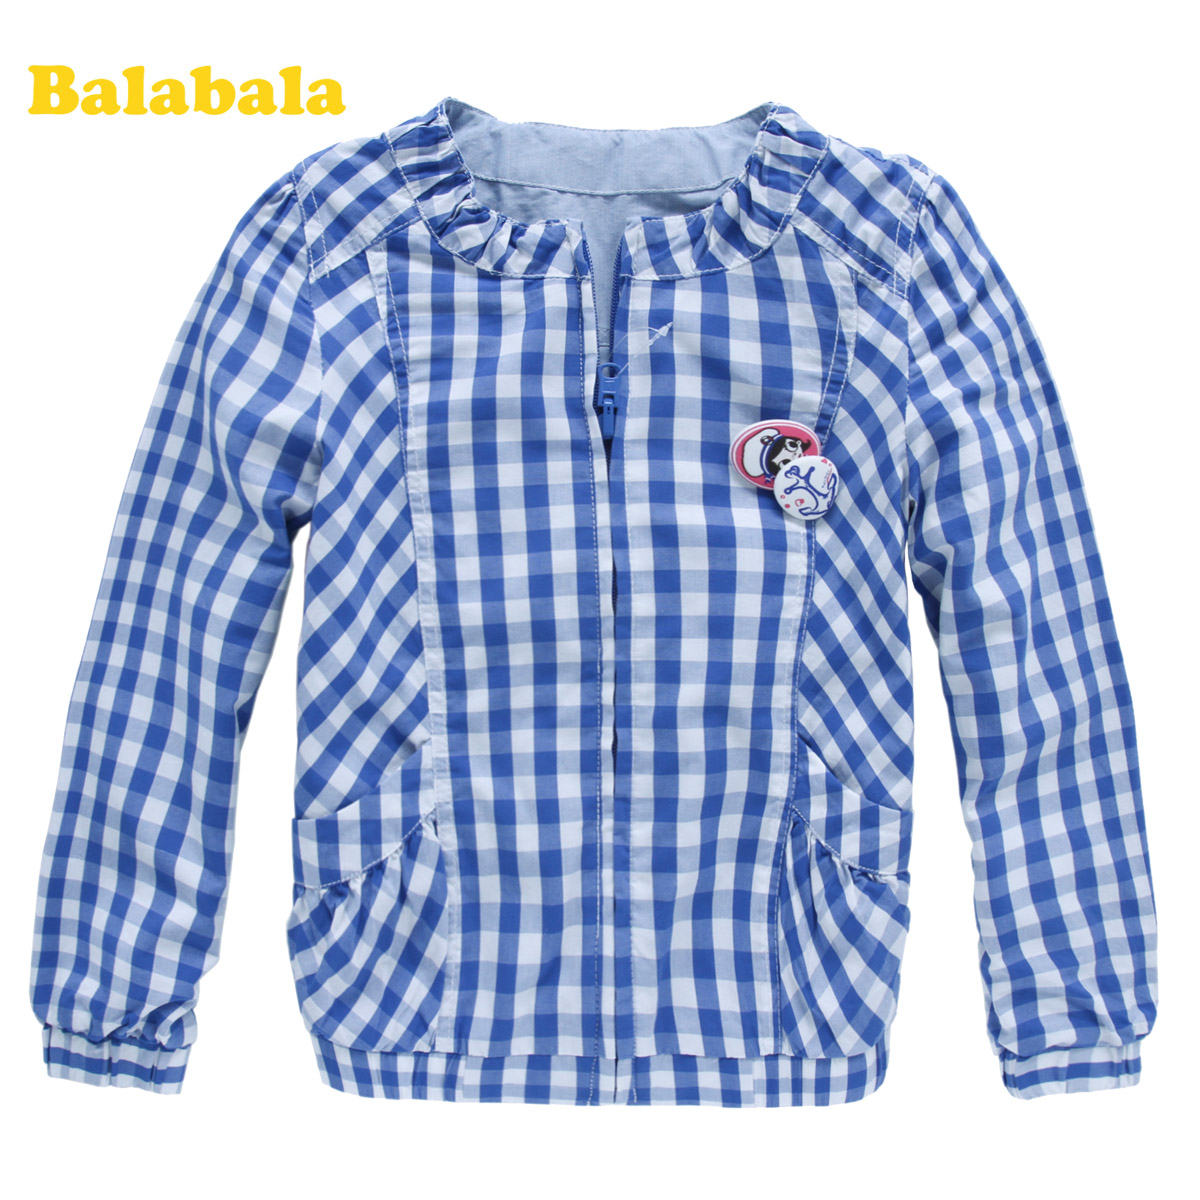 A+ BALABALA 2013 children's clothing outerwear classic plaid ploughboys child reversible outerwear